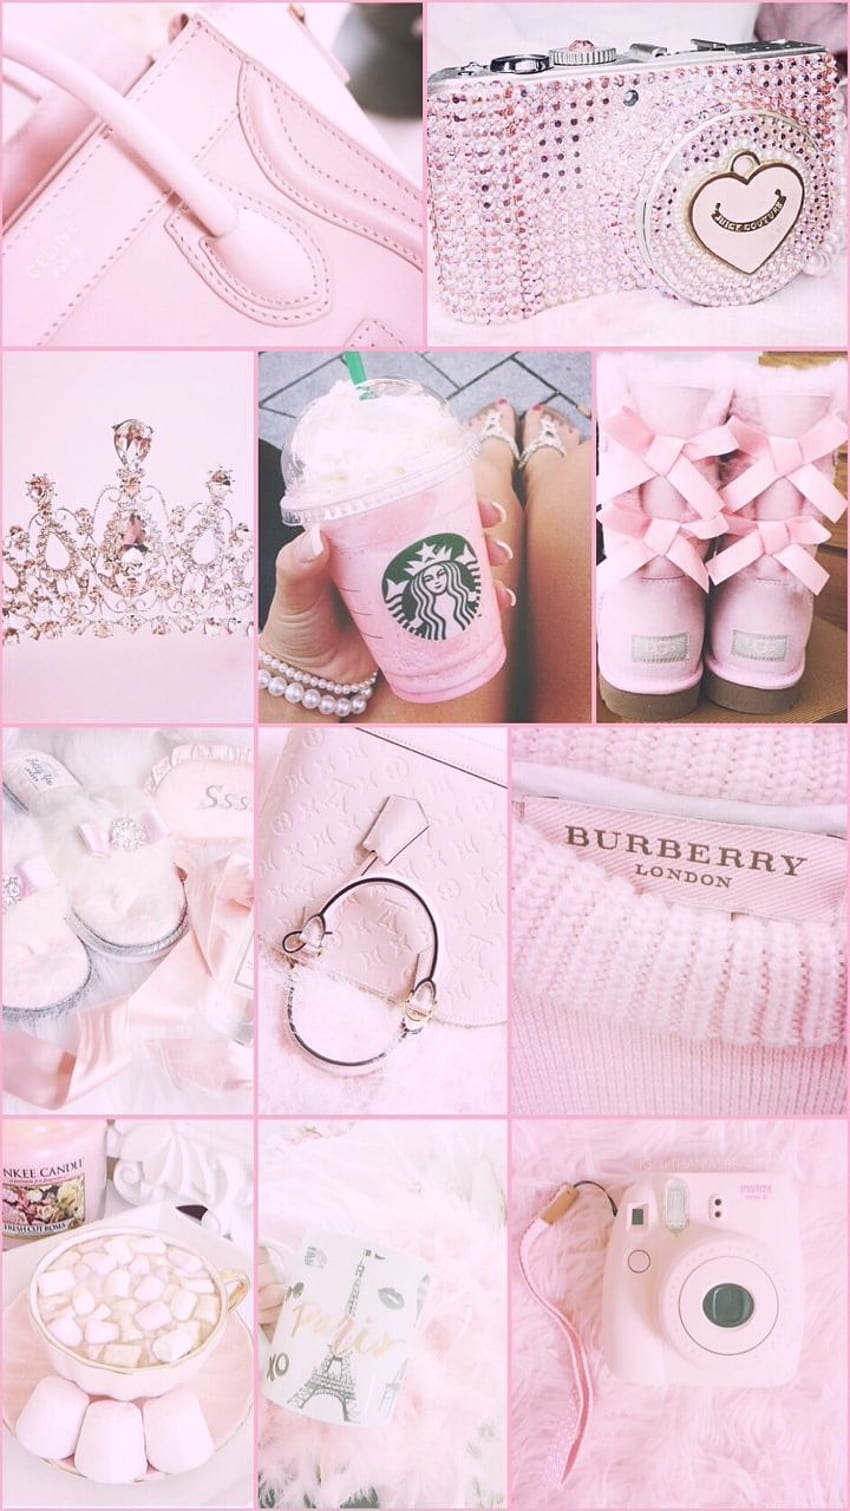 A collage of pink items including a Starbucks drink, a burberry bag, and a polaroid camera - Pink collage, Virgo